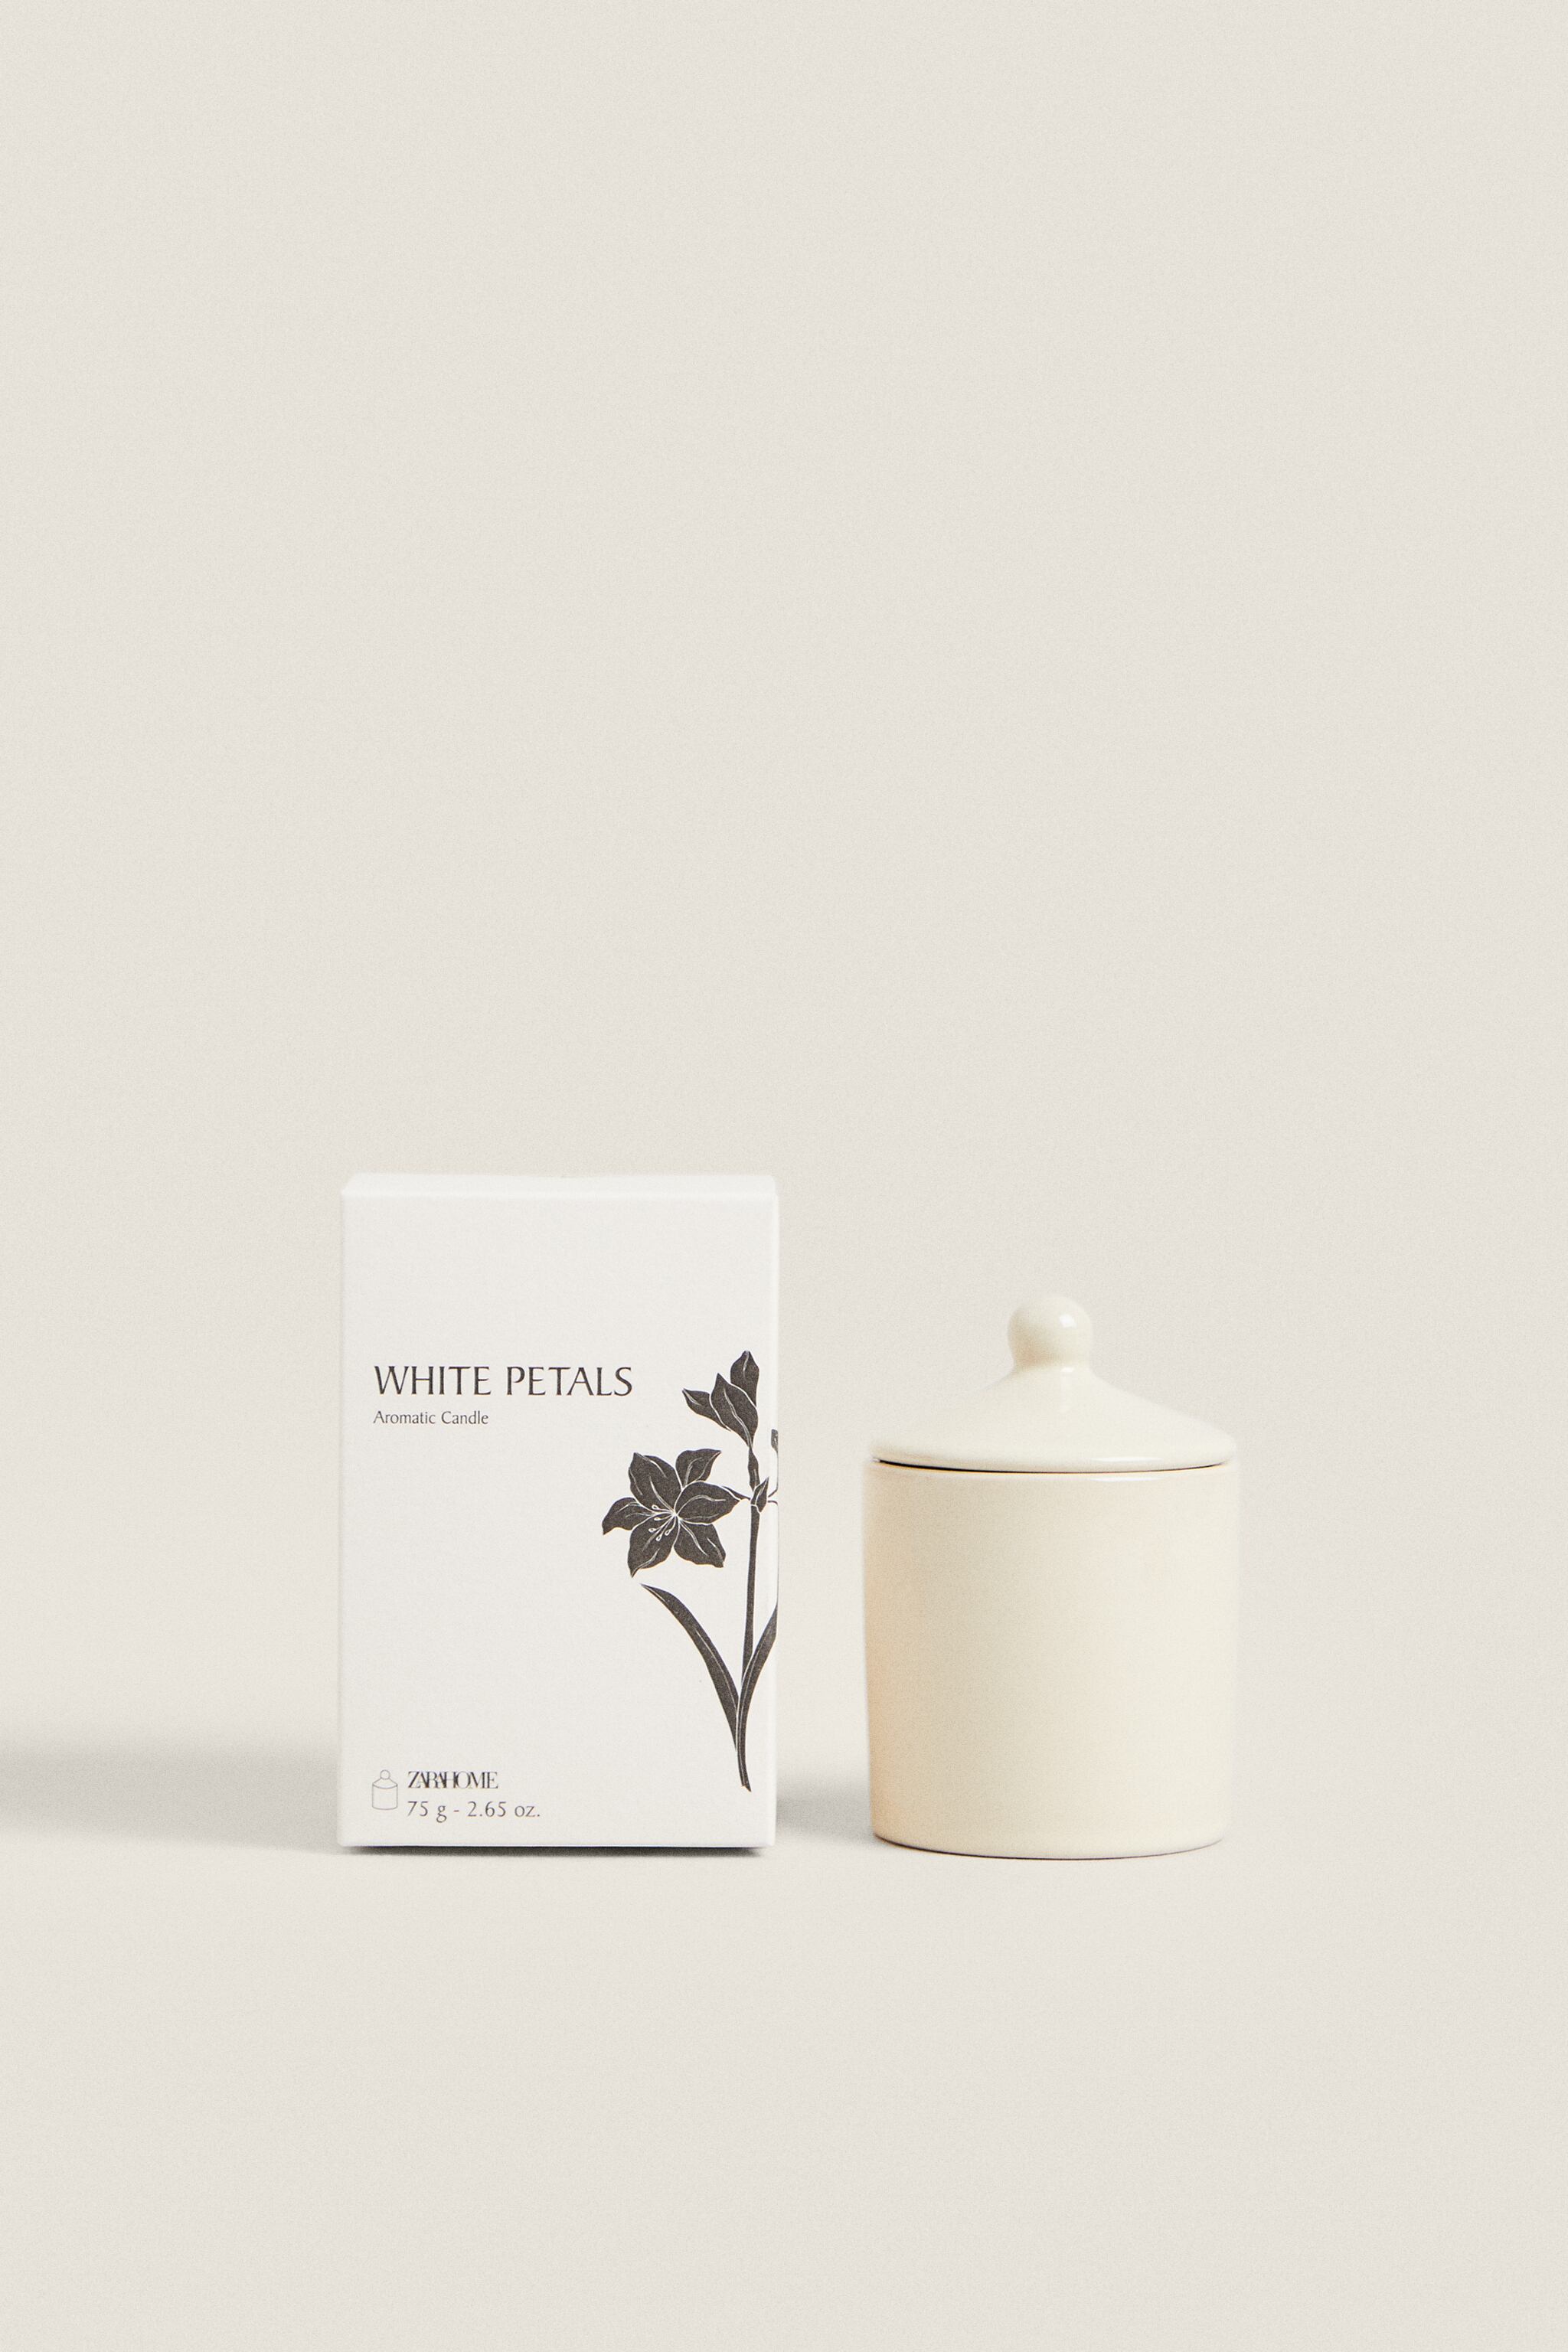 G) WHITE PETALS SCENTED CANDLE